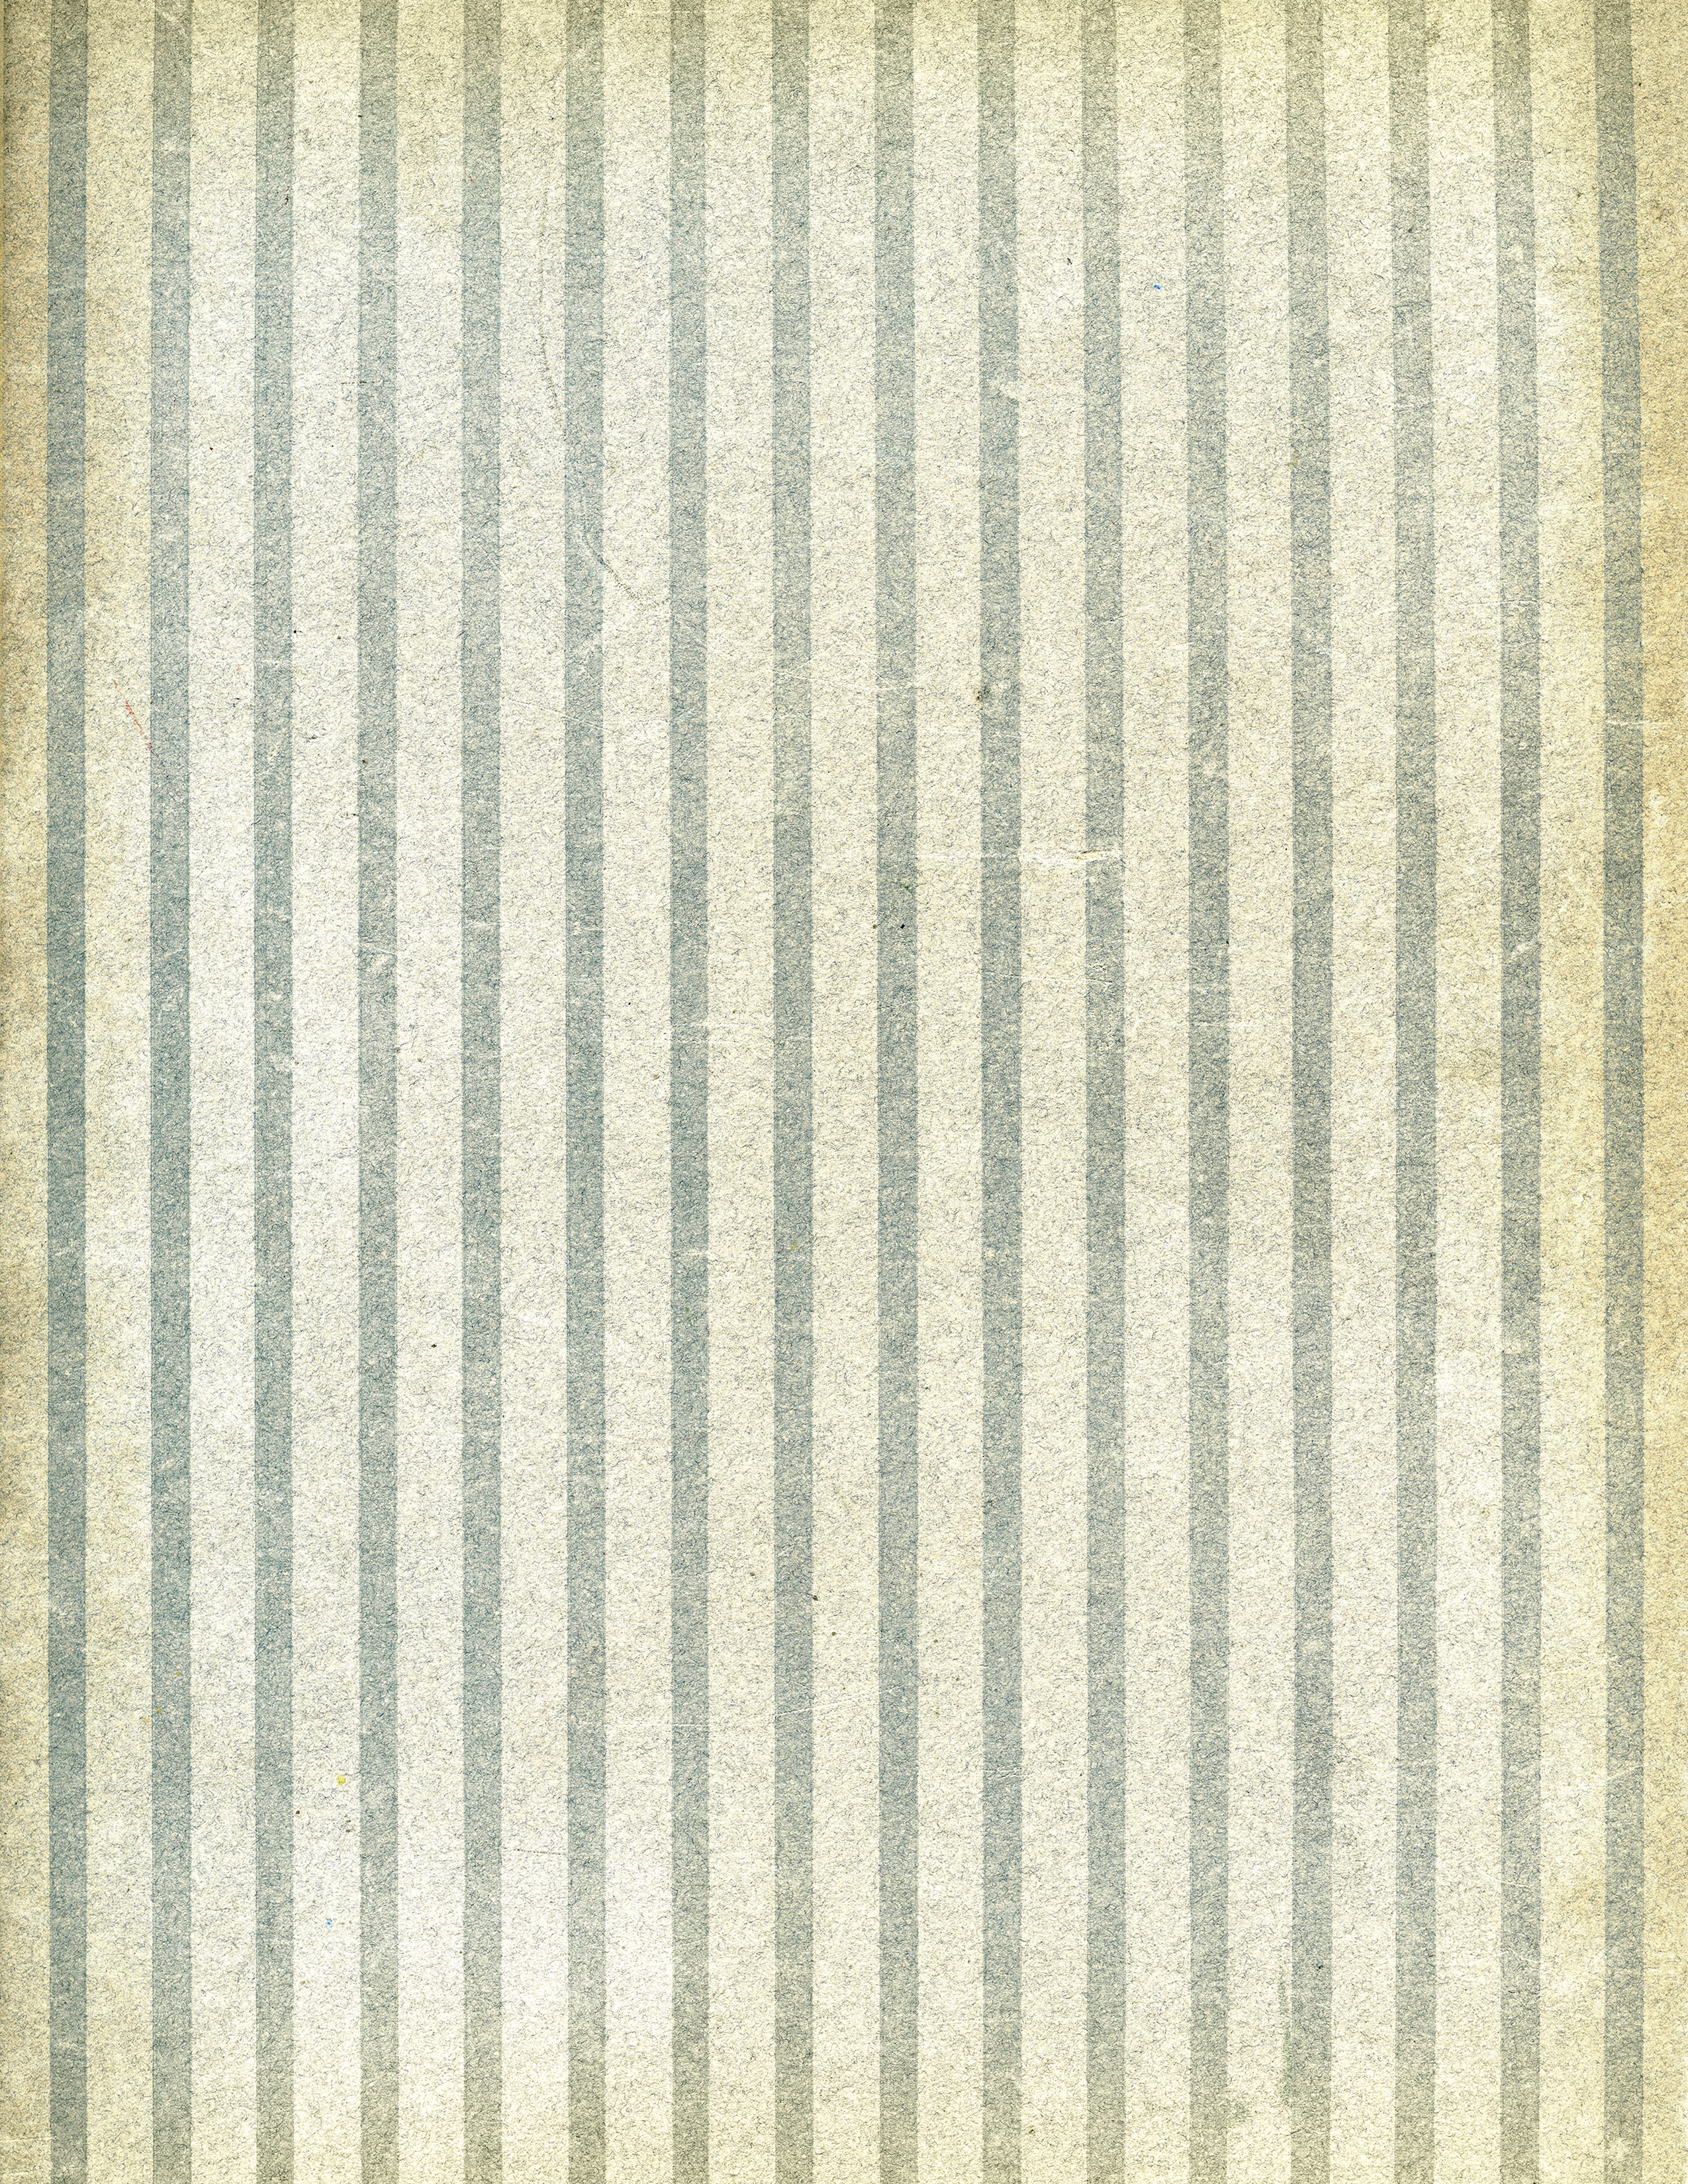 striped texture page